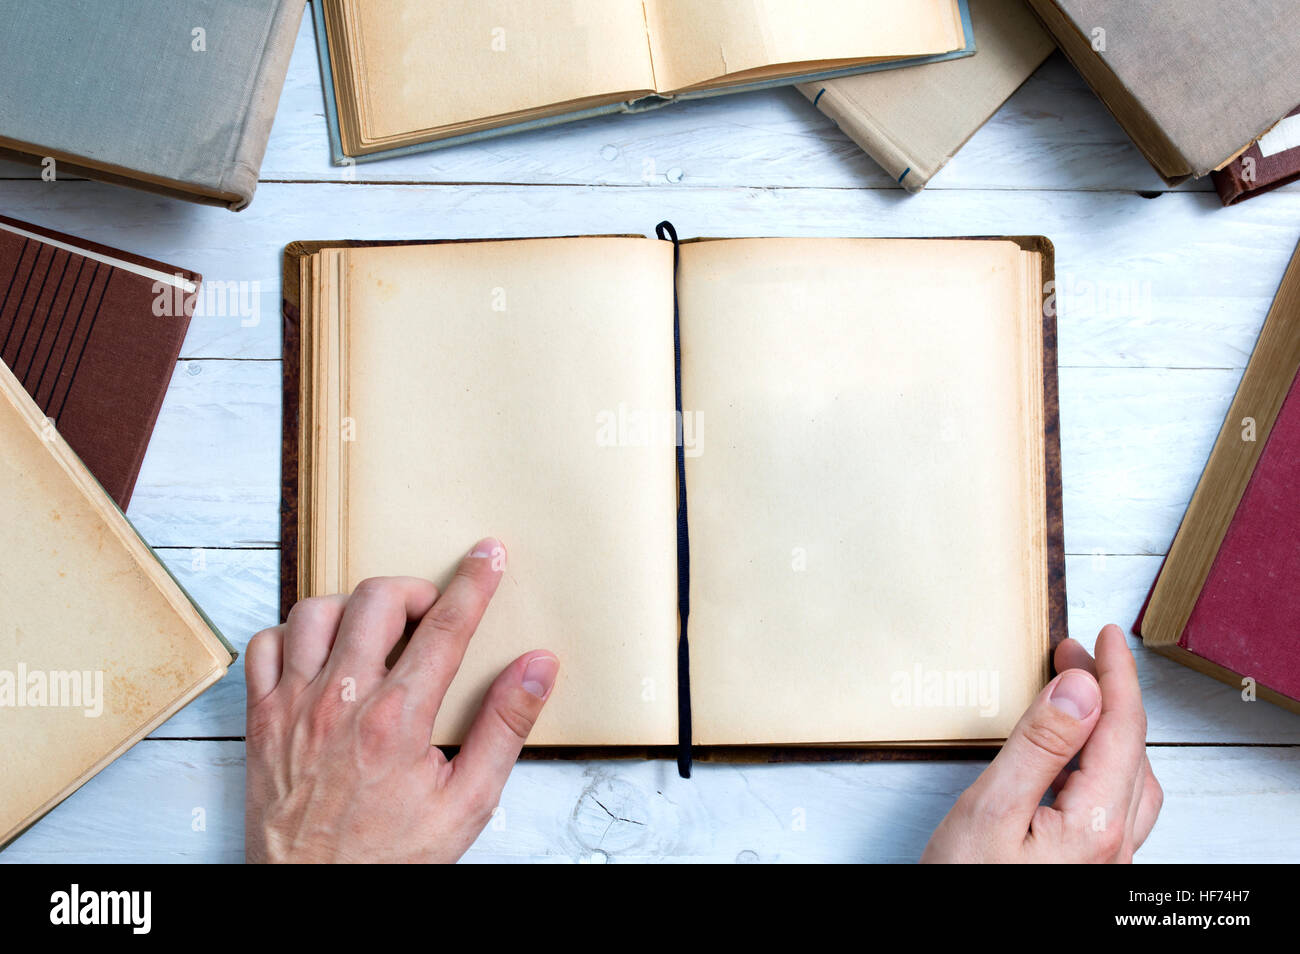 Old books with empty pages for your text and man's hand shows important place. Stock Photo